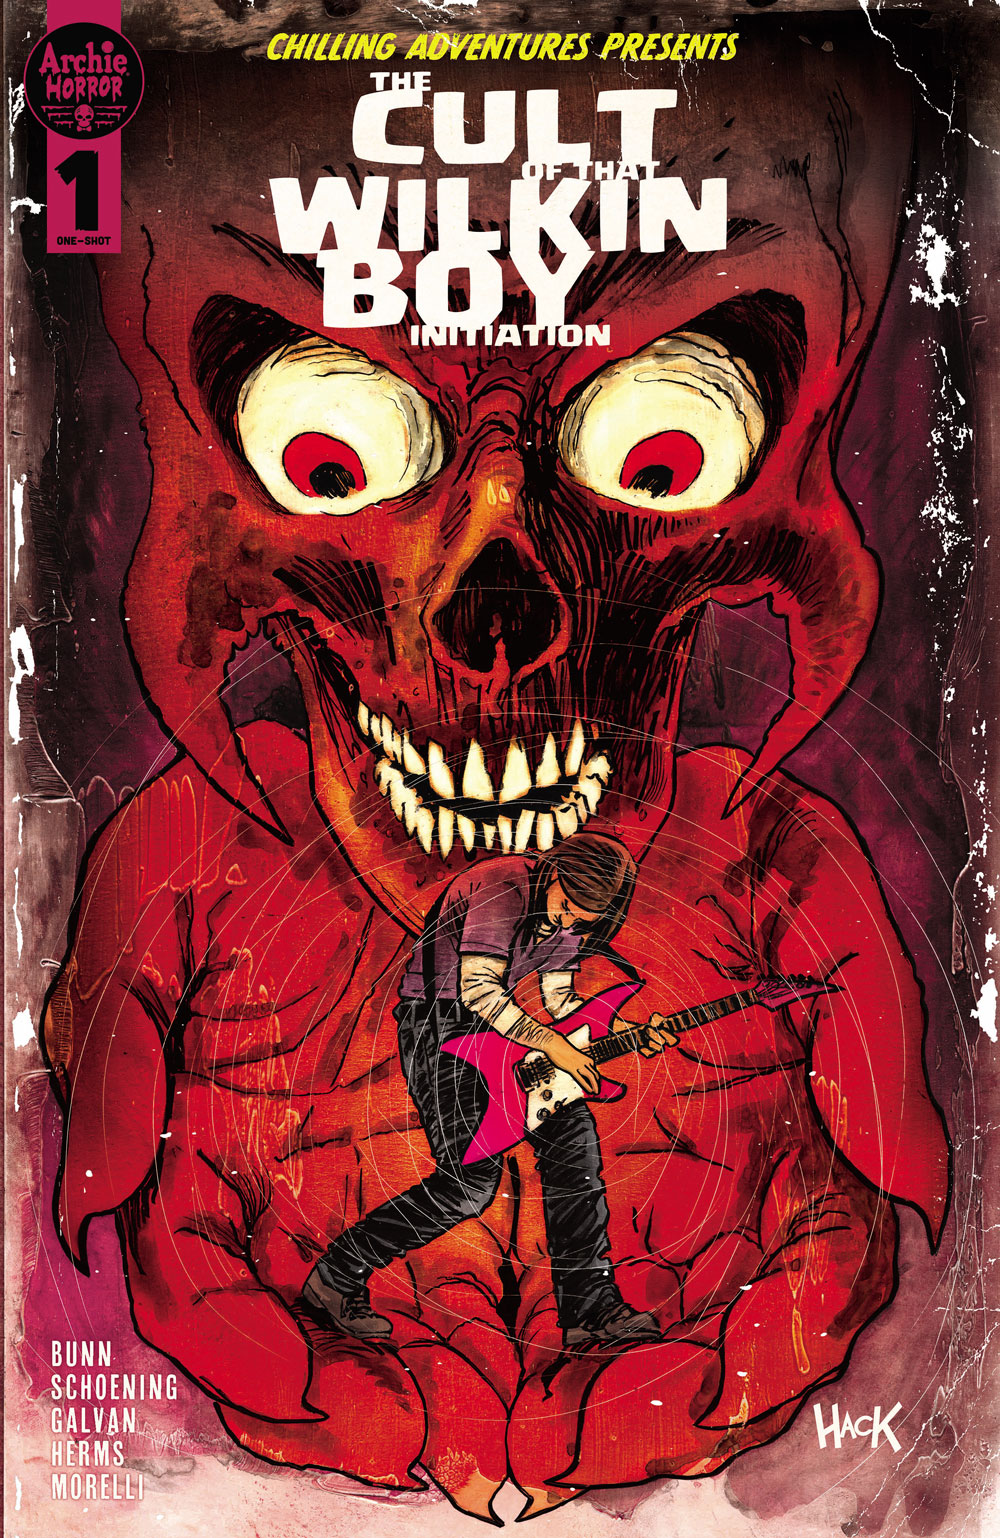 Bingo Wilkin, an Archie Comics character, plays guitar in the palm of a demonic figure's hand, who looks down at him menacingly with a skull-like face.